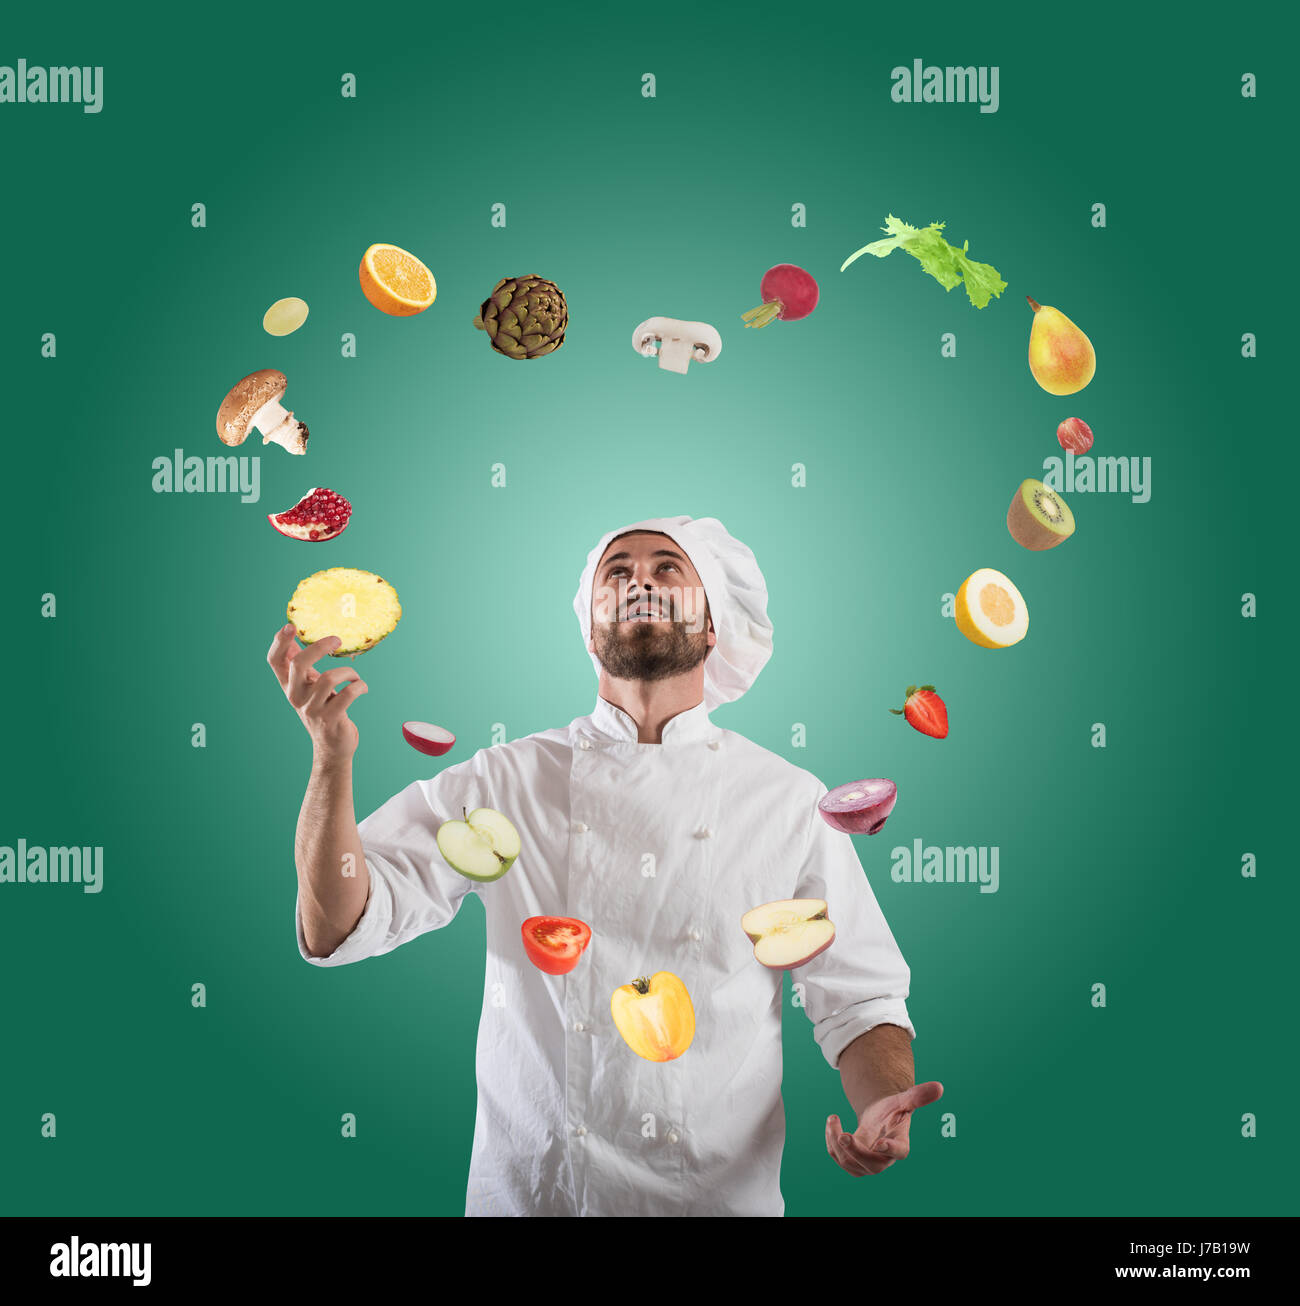 Lovely and creative  food Stock Photo